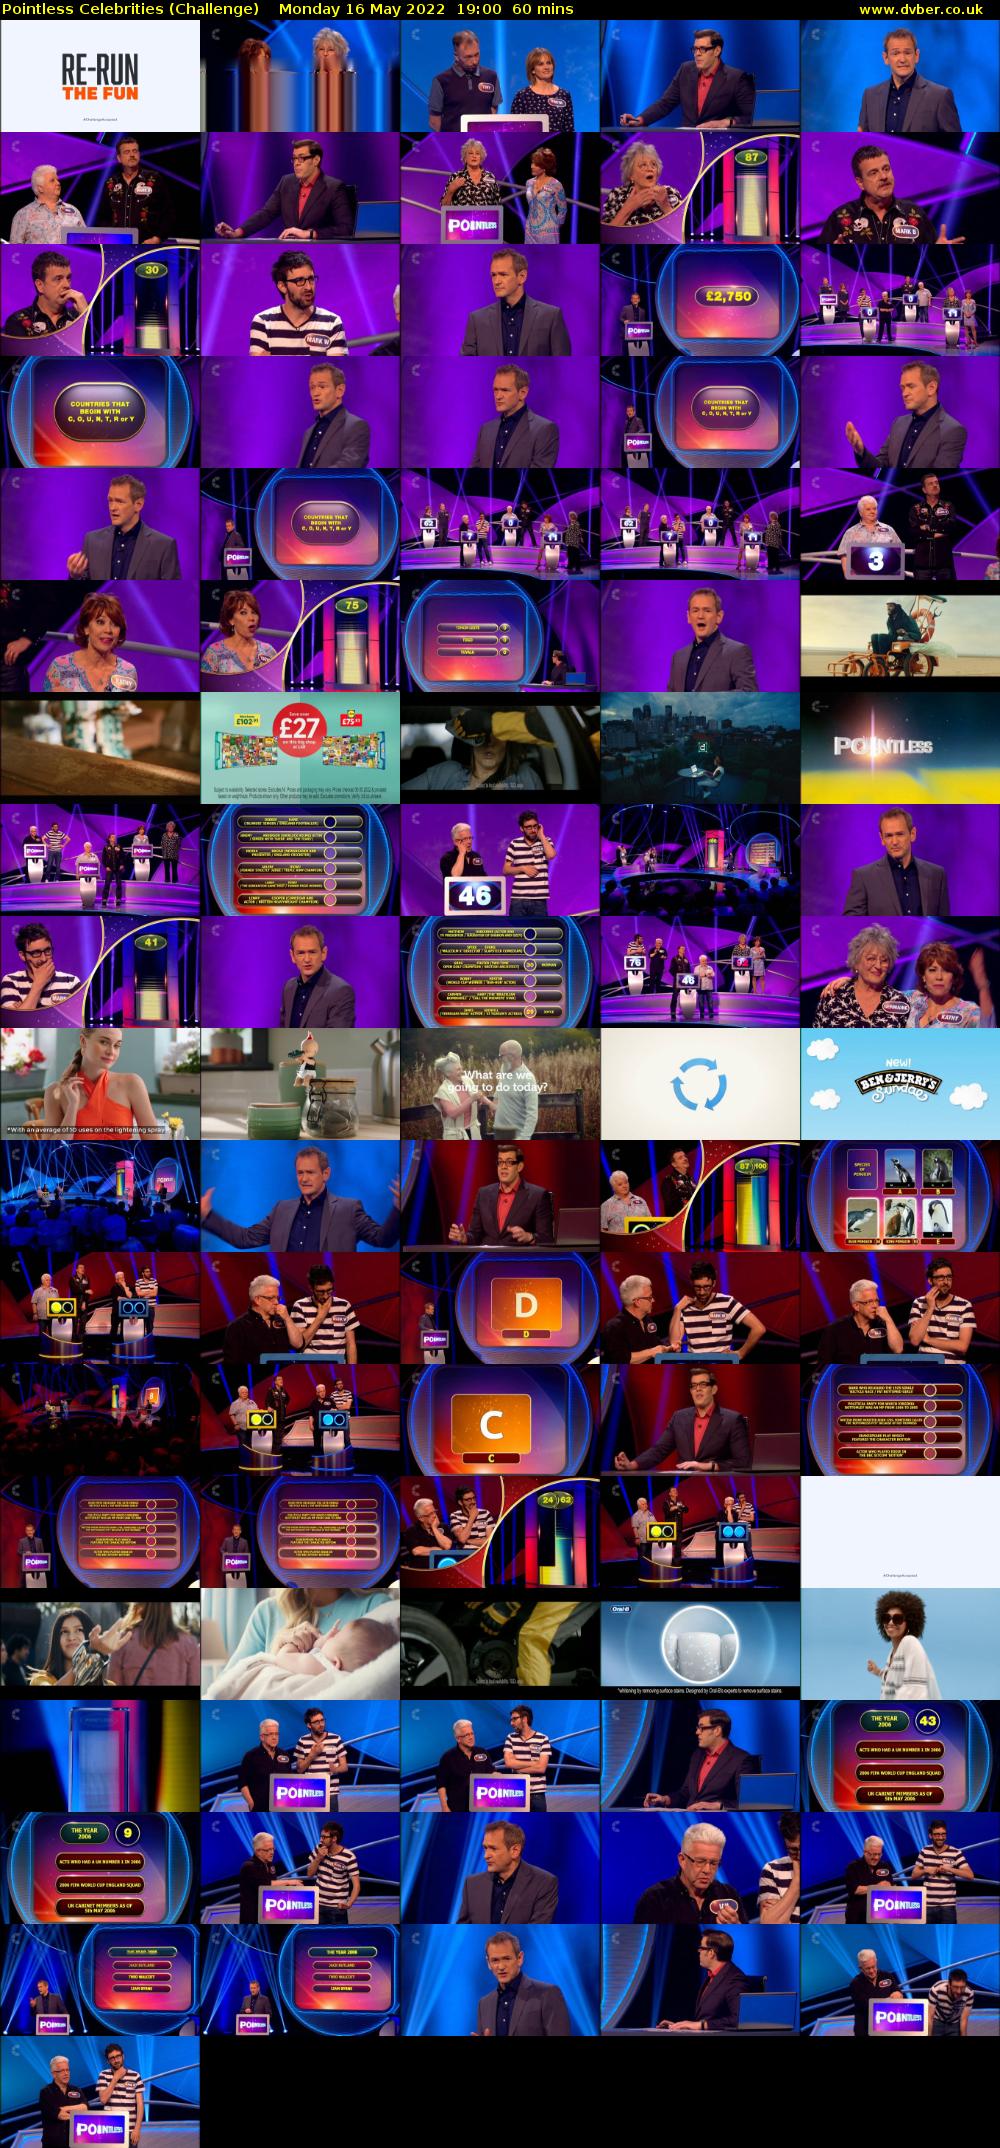 Pointless Celebrities (Challenge) Monday 16 May 2022 19:00 - 20:00